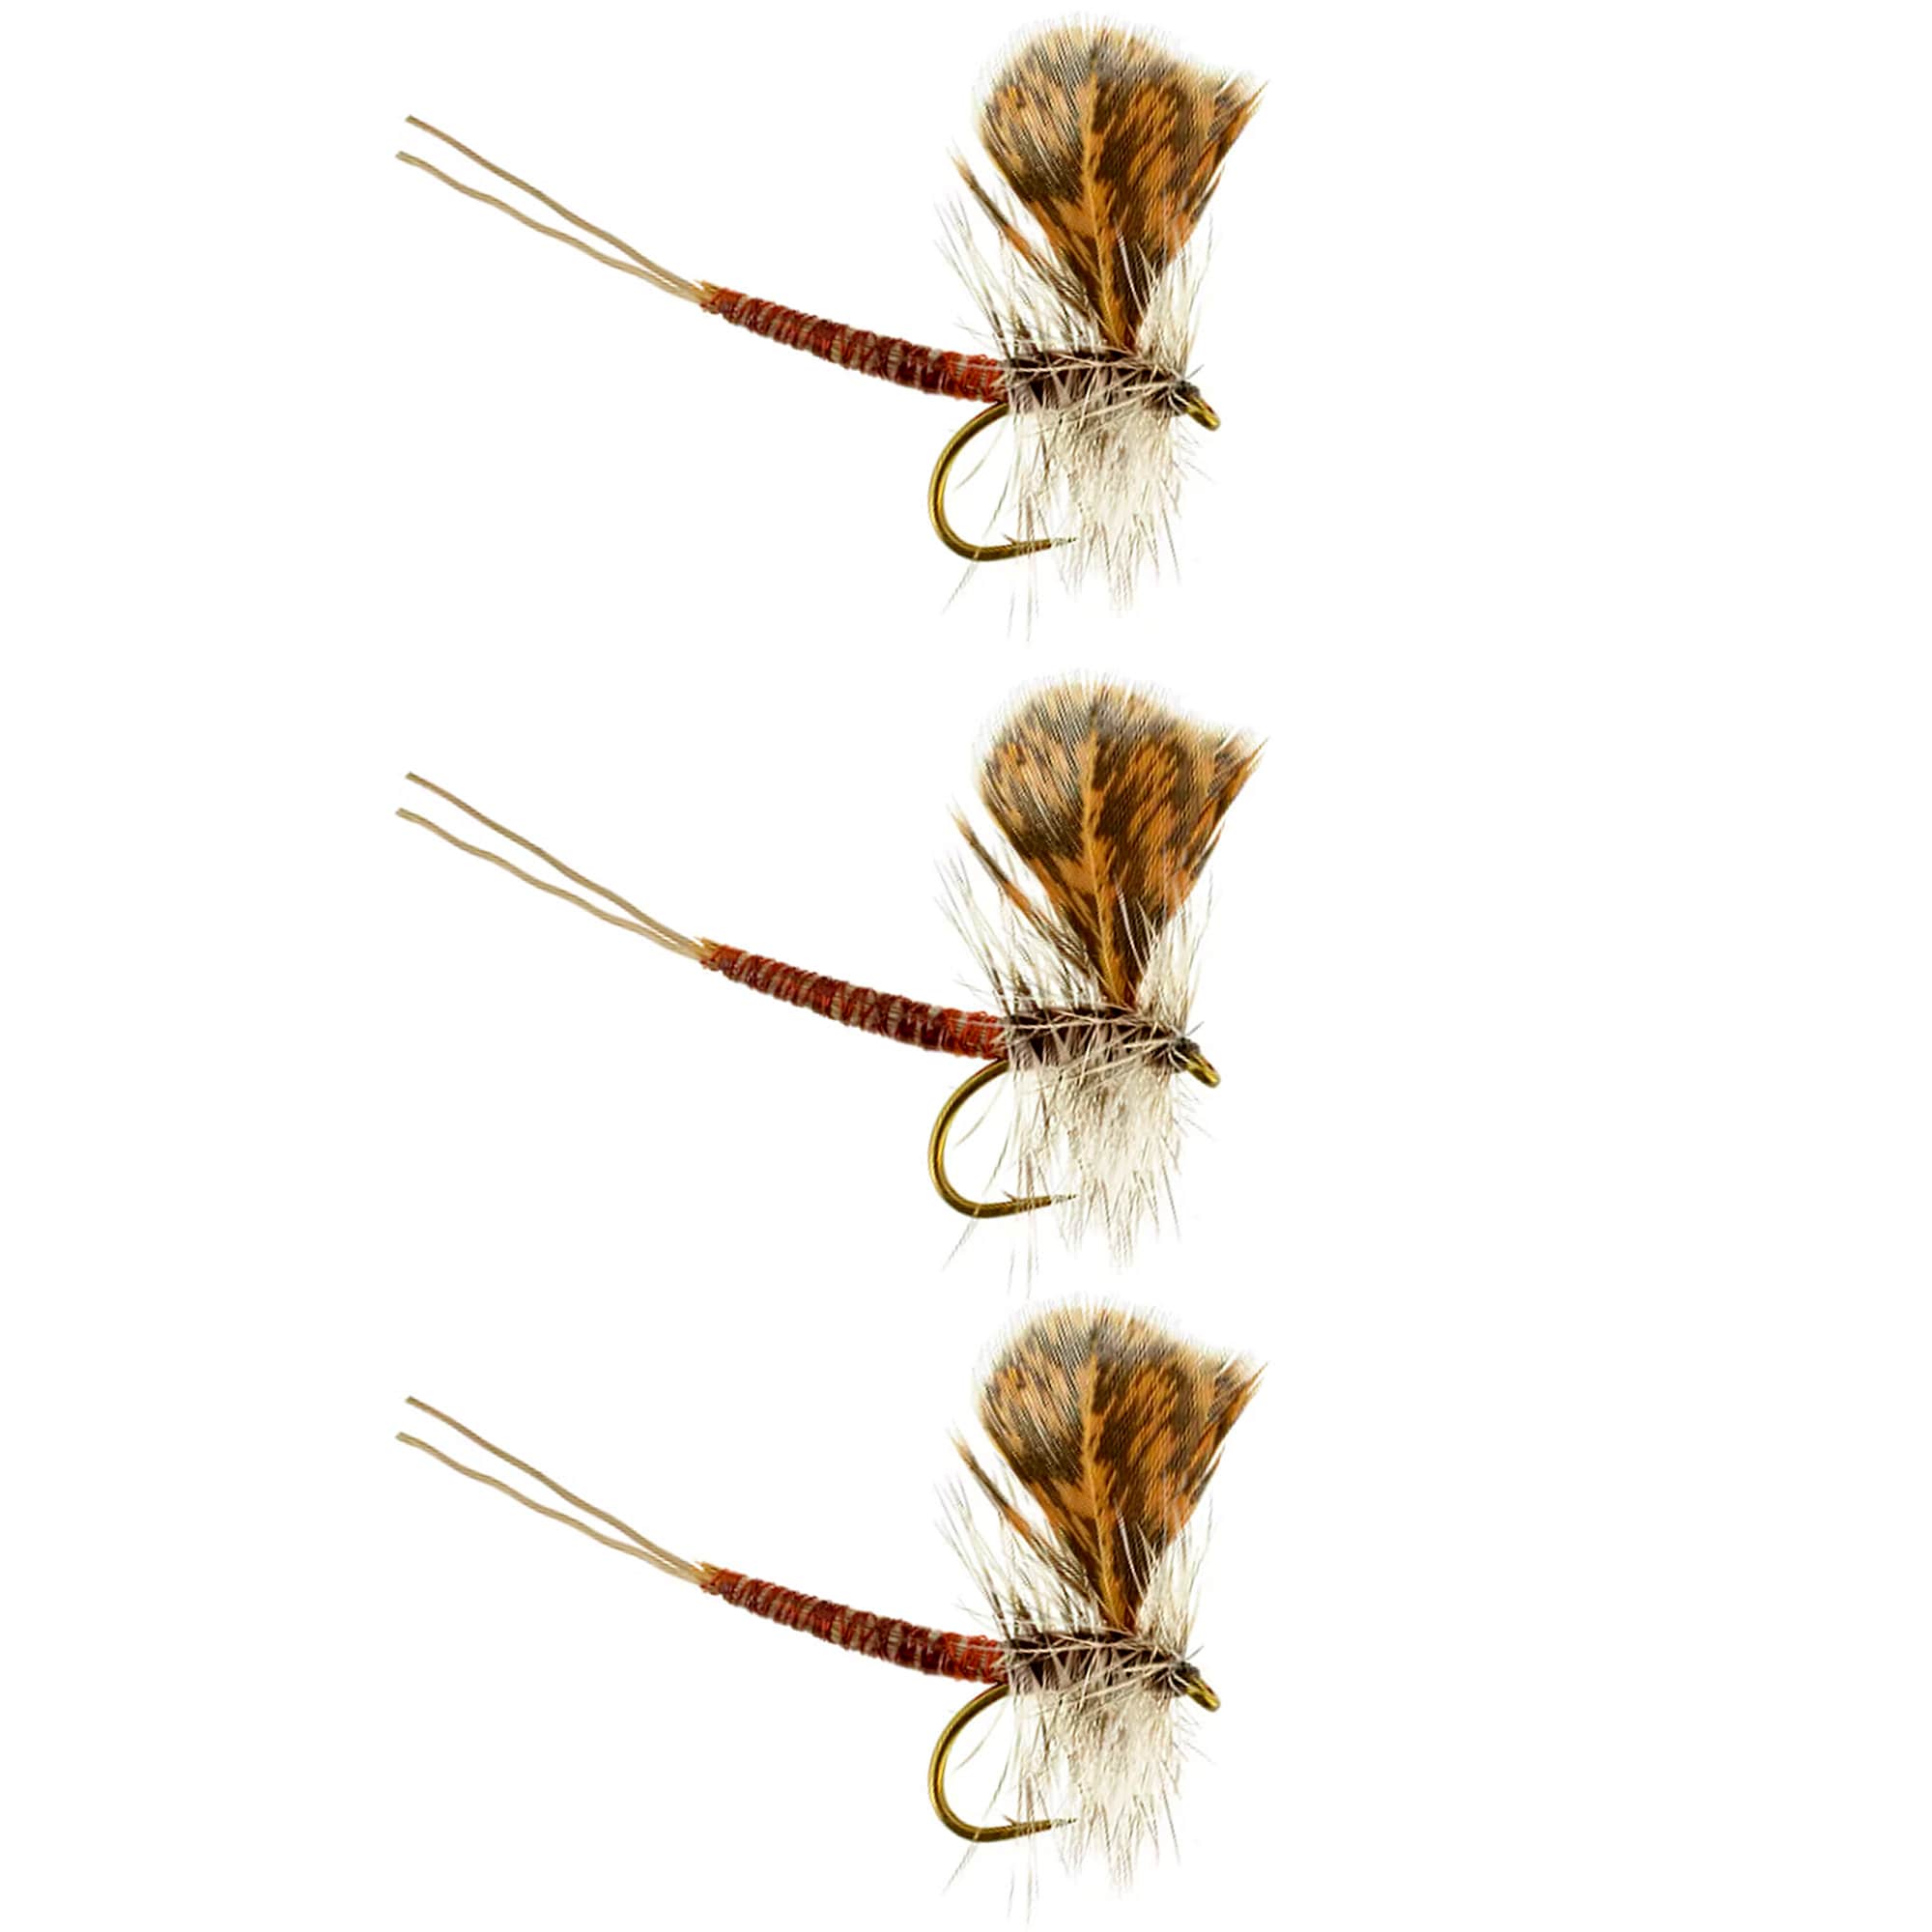 Dry Flies Brown Drake Extended Body Popular Dry Fly for All Fly